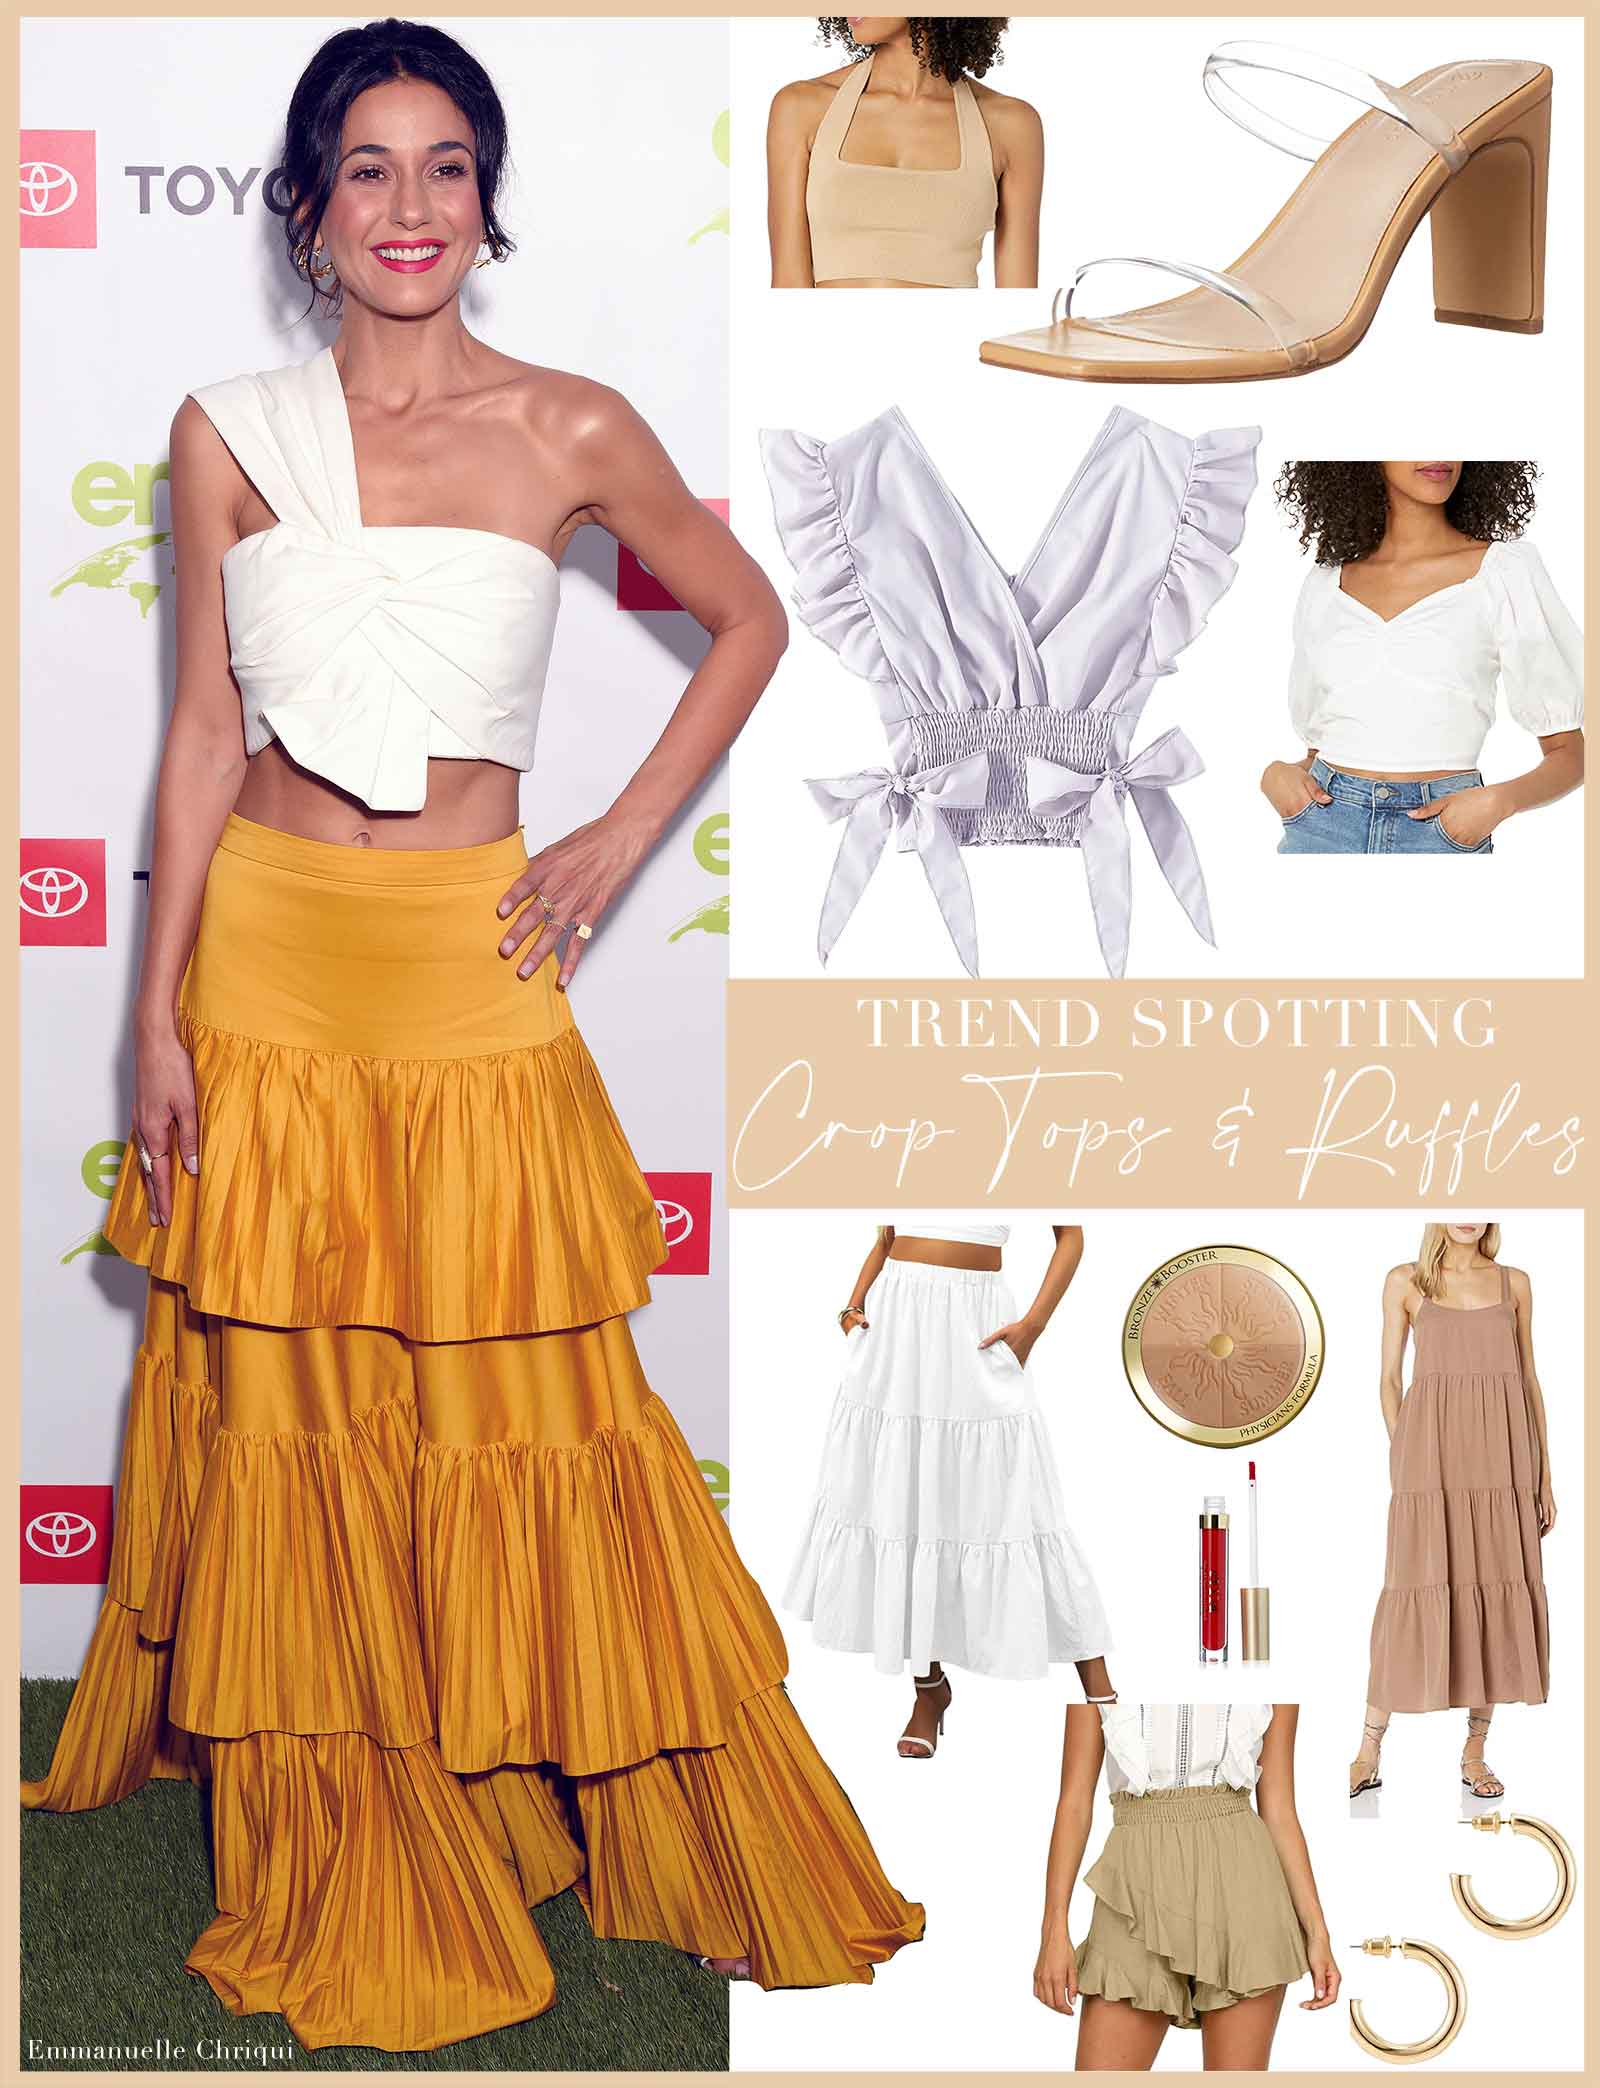 Emmanuelle Chriqui shines in a gold yellow ruffle tiered midi skirt and one shoulder crop top.